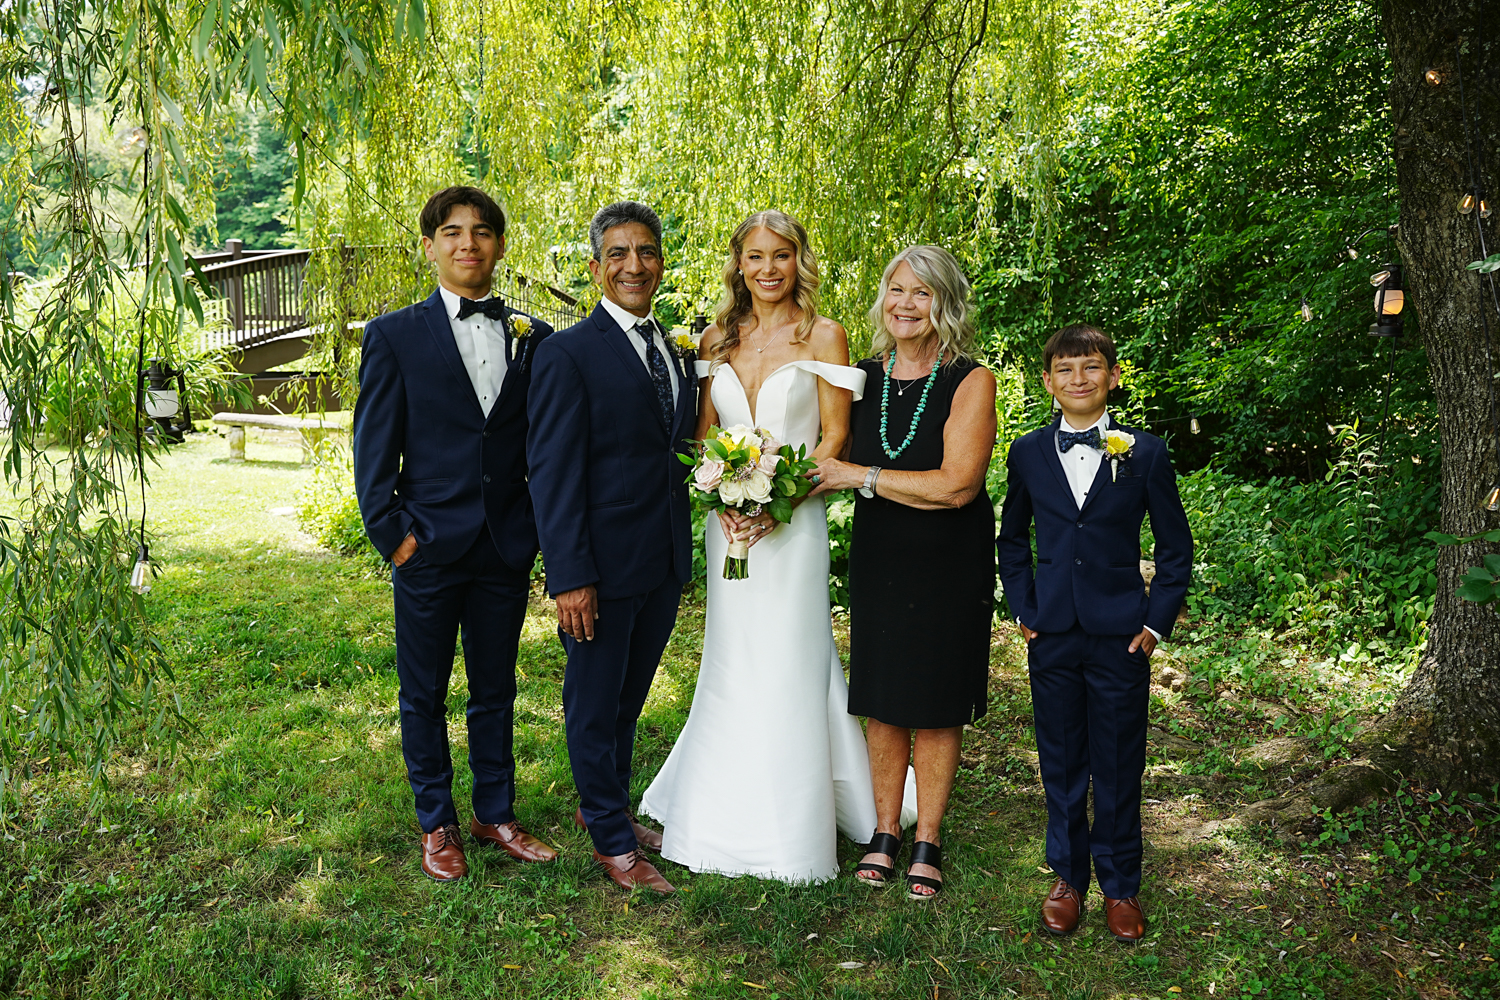 Small wedding with four guests under a willow tree in the summer